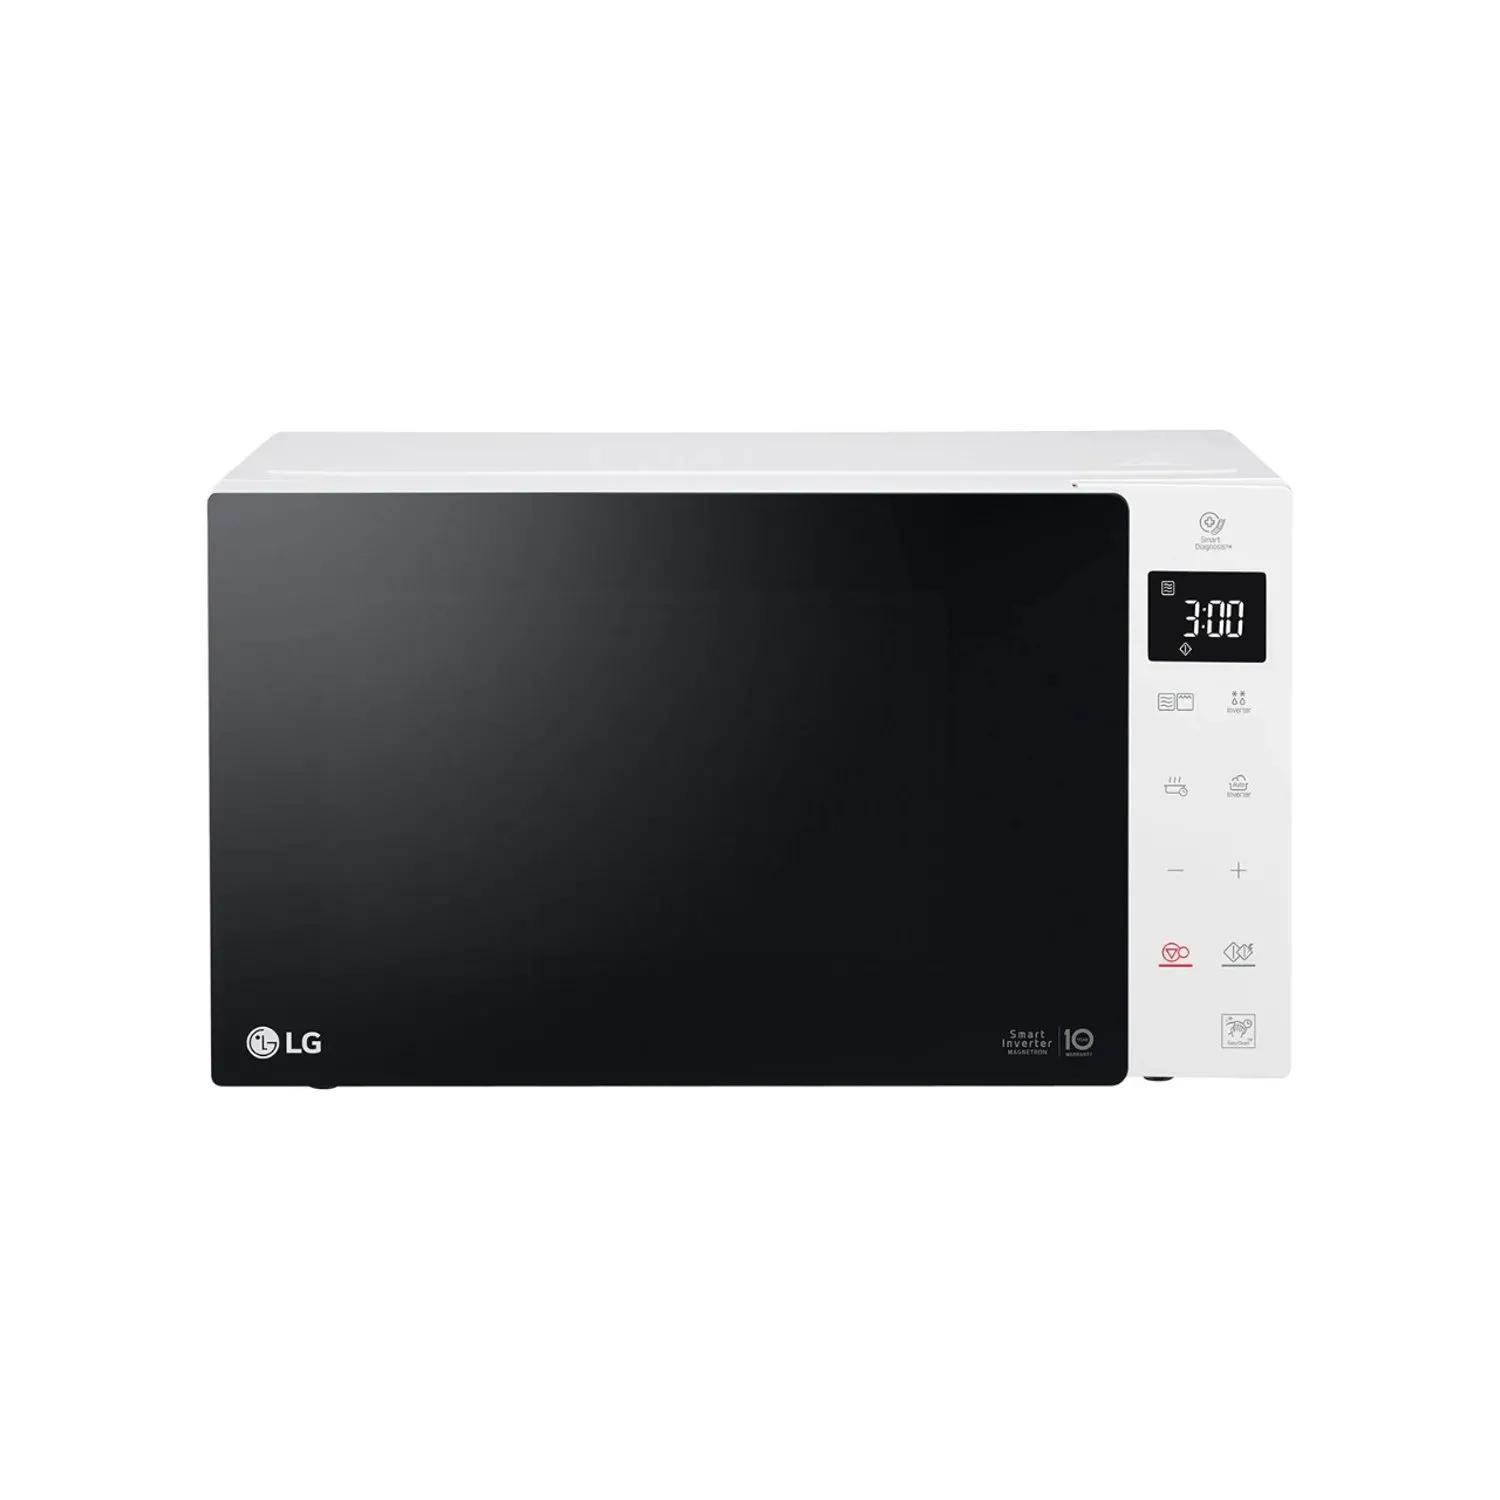 LG 25 Liter Electronics Microwave with Grill Digital Display 1000 Watts White Model MH6535GISW | 1 Year Full Warranty